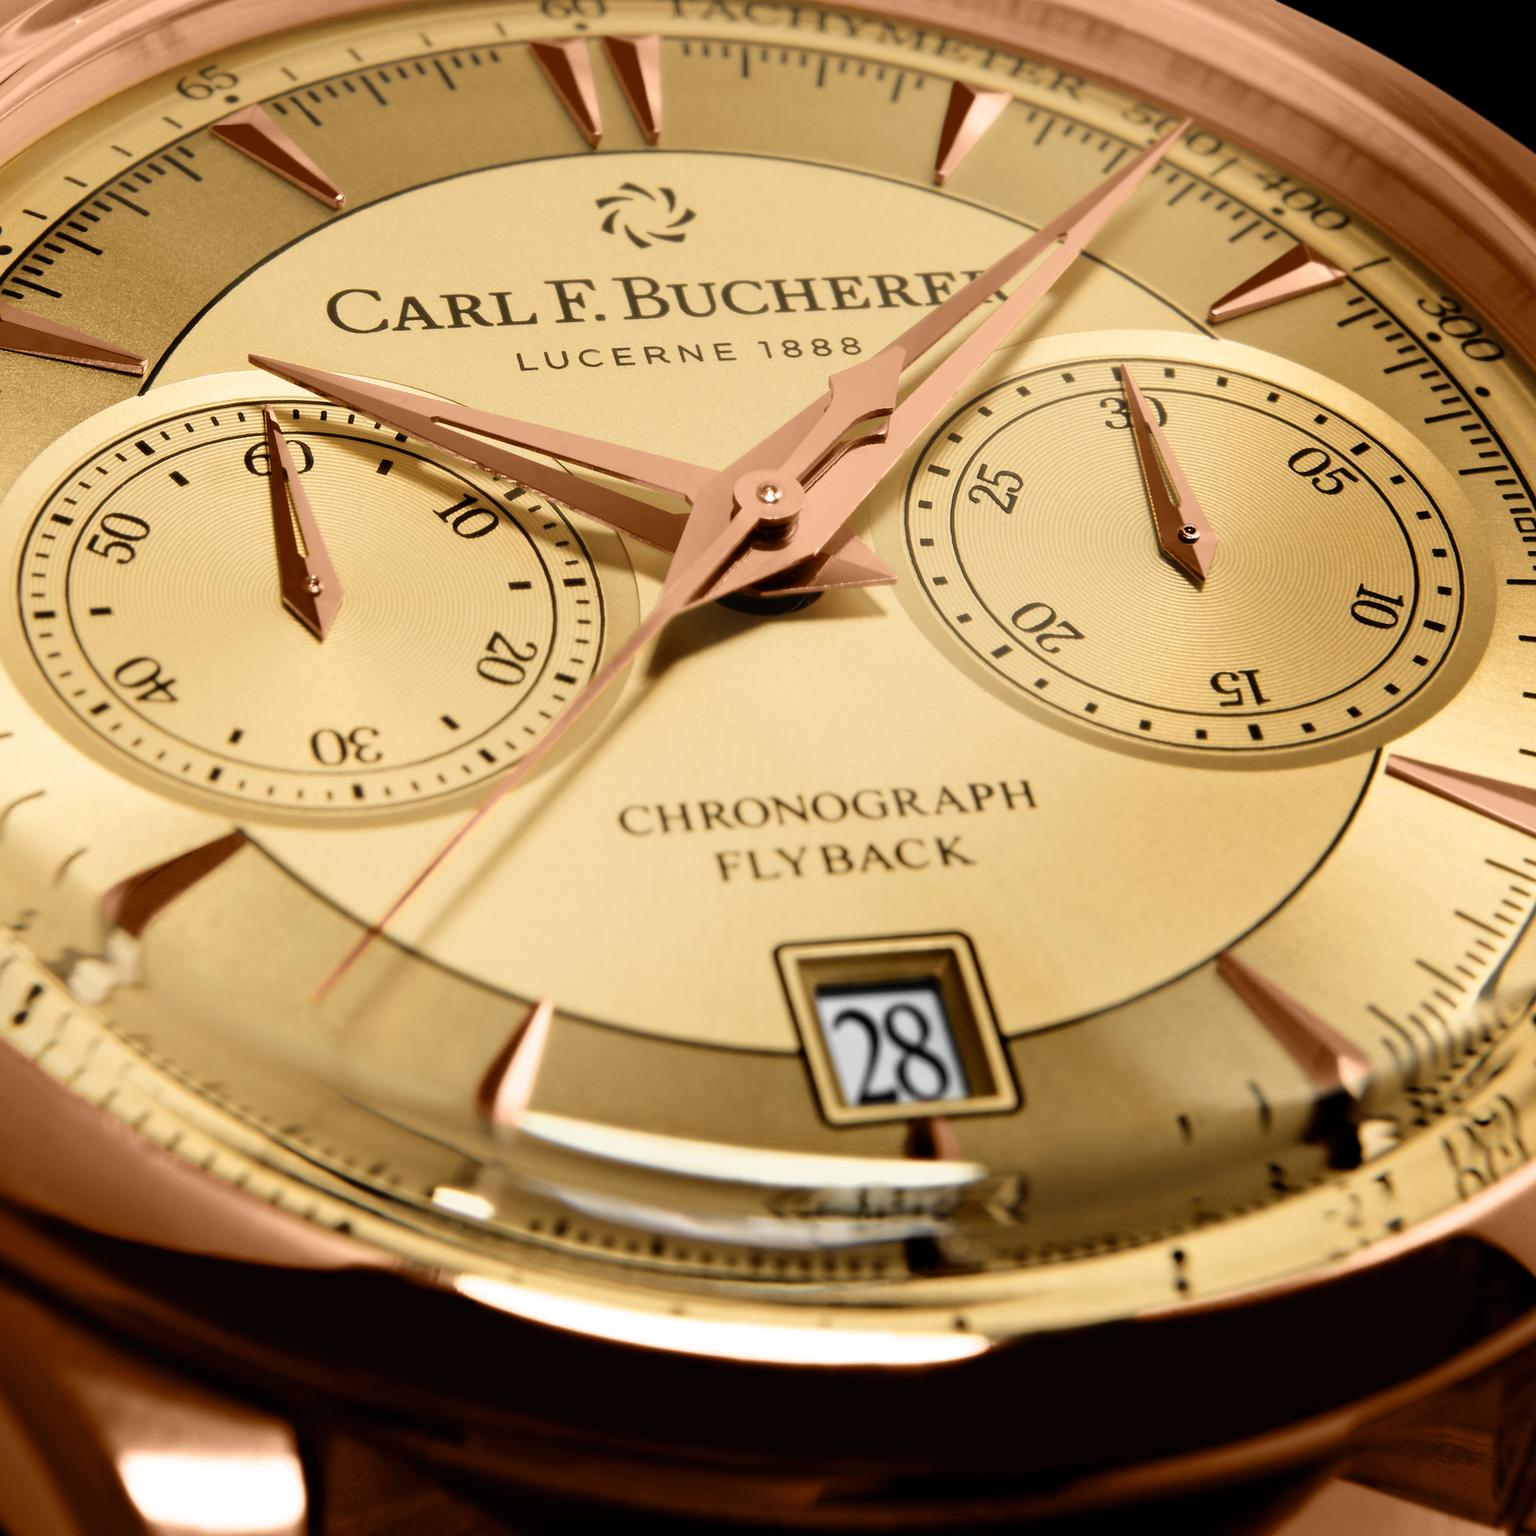 Back to the future with Carl F. Bucherer